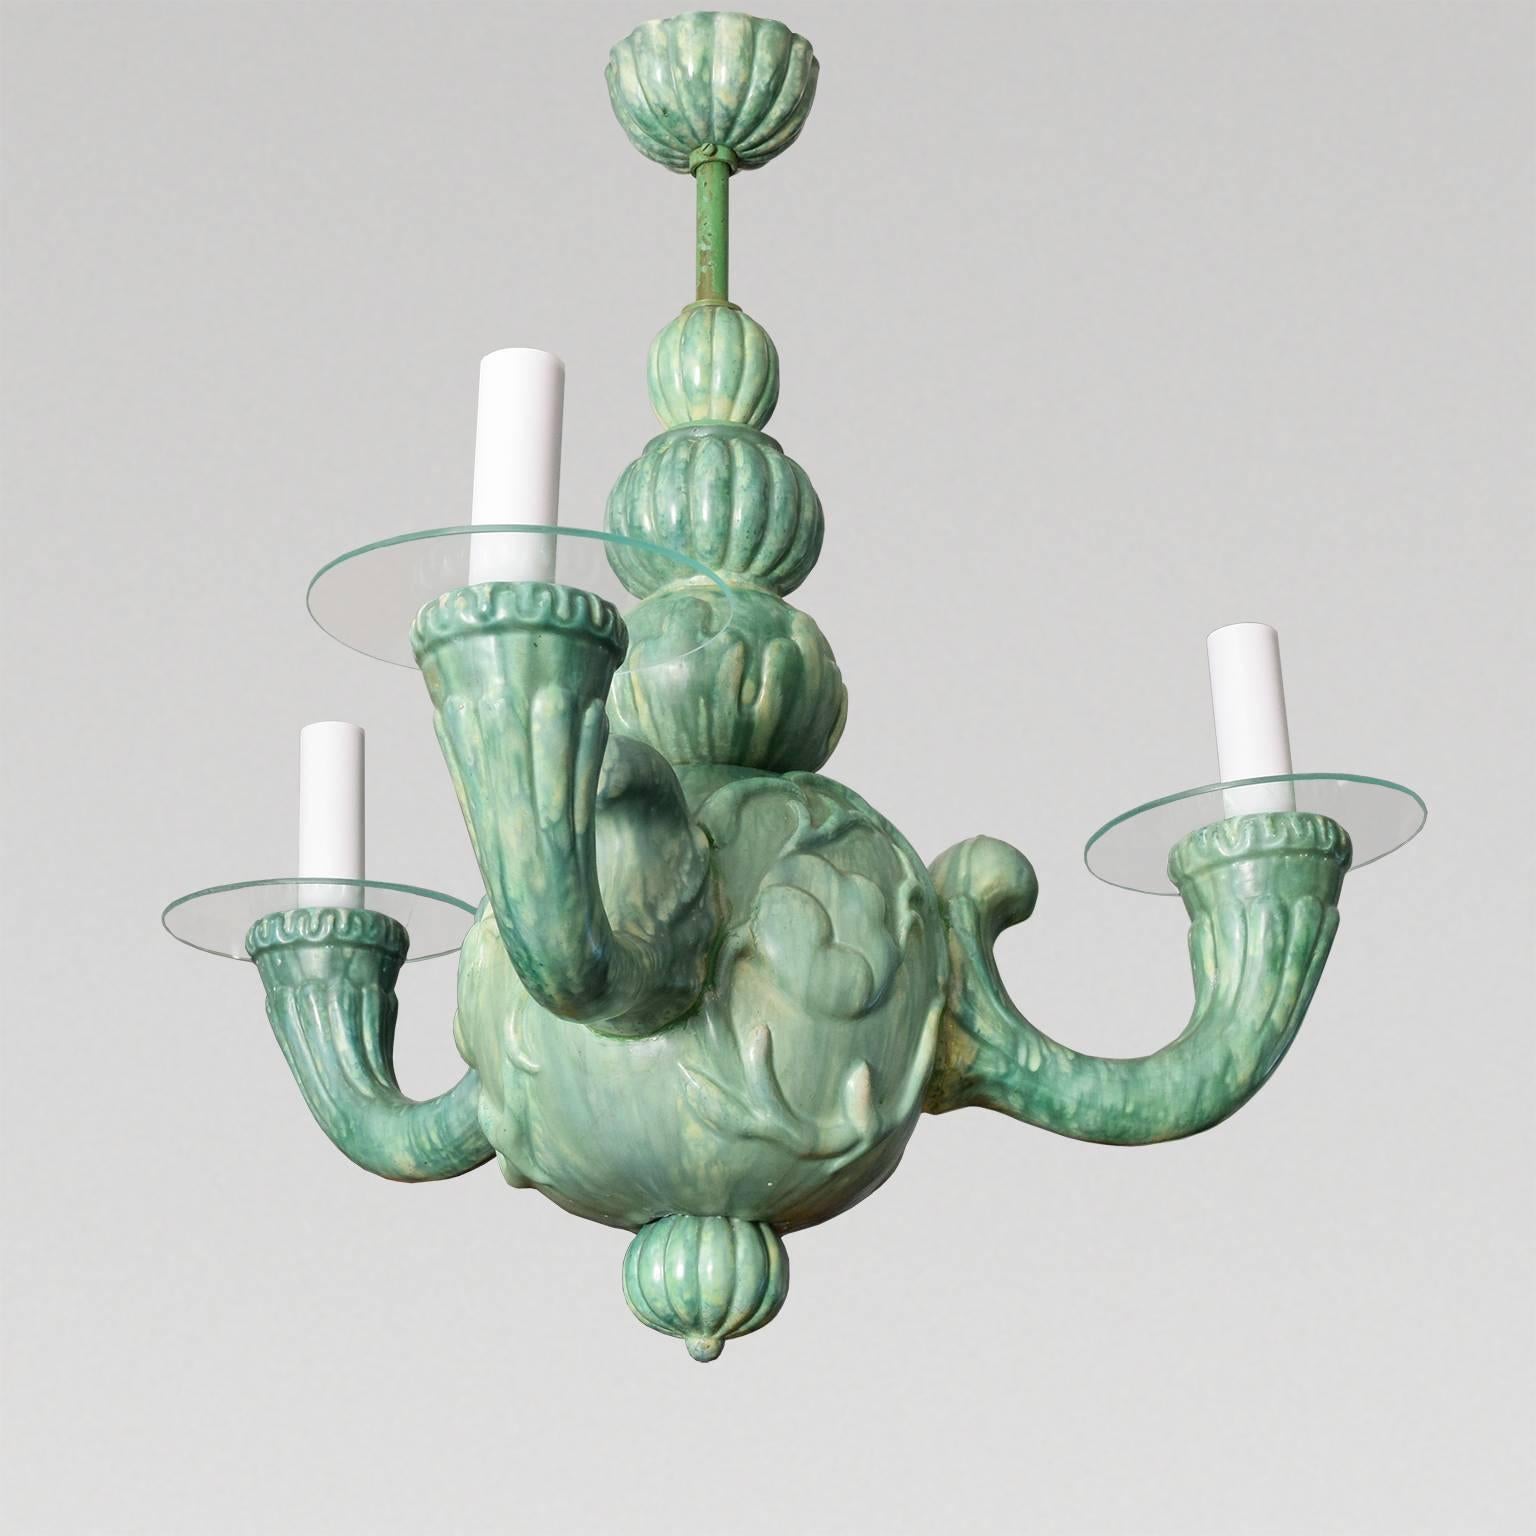 A Swedish Art Deco, Scandinavian Modern glazed ceramic chandelier with three-arms each with a standard Edison base socket within a candle sleeve atop a clear glass bobeche. The center globe has stylized flowers and leaves. The fixture has been